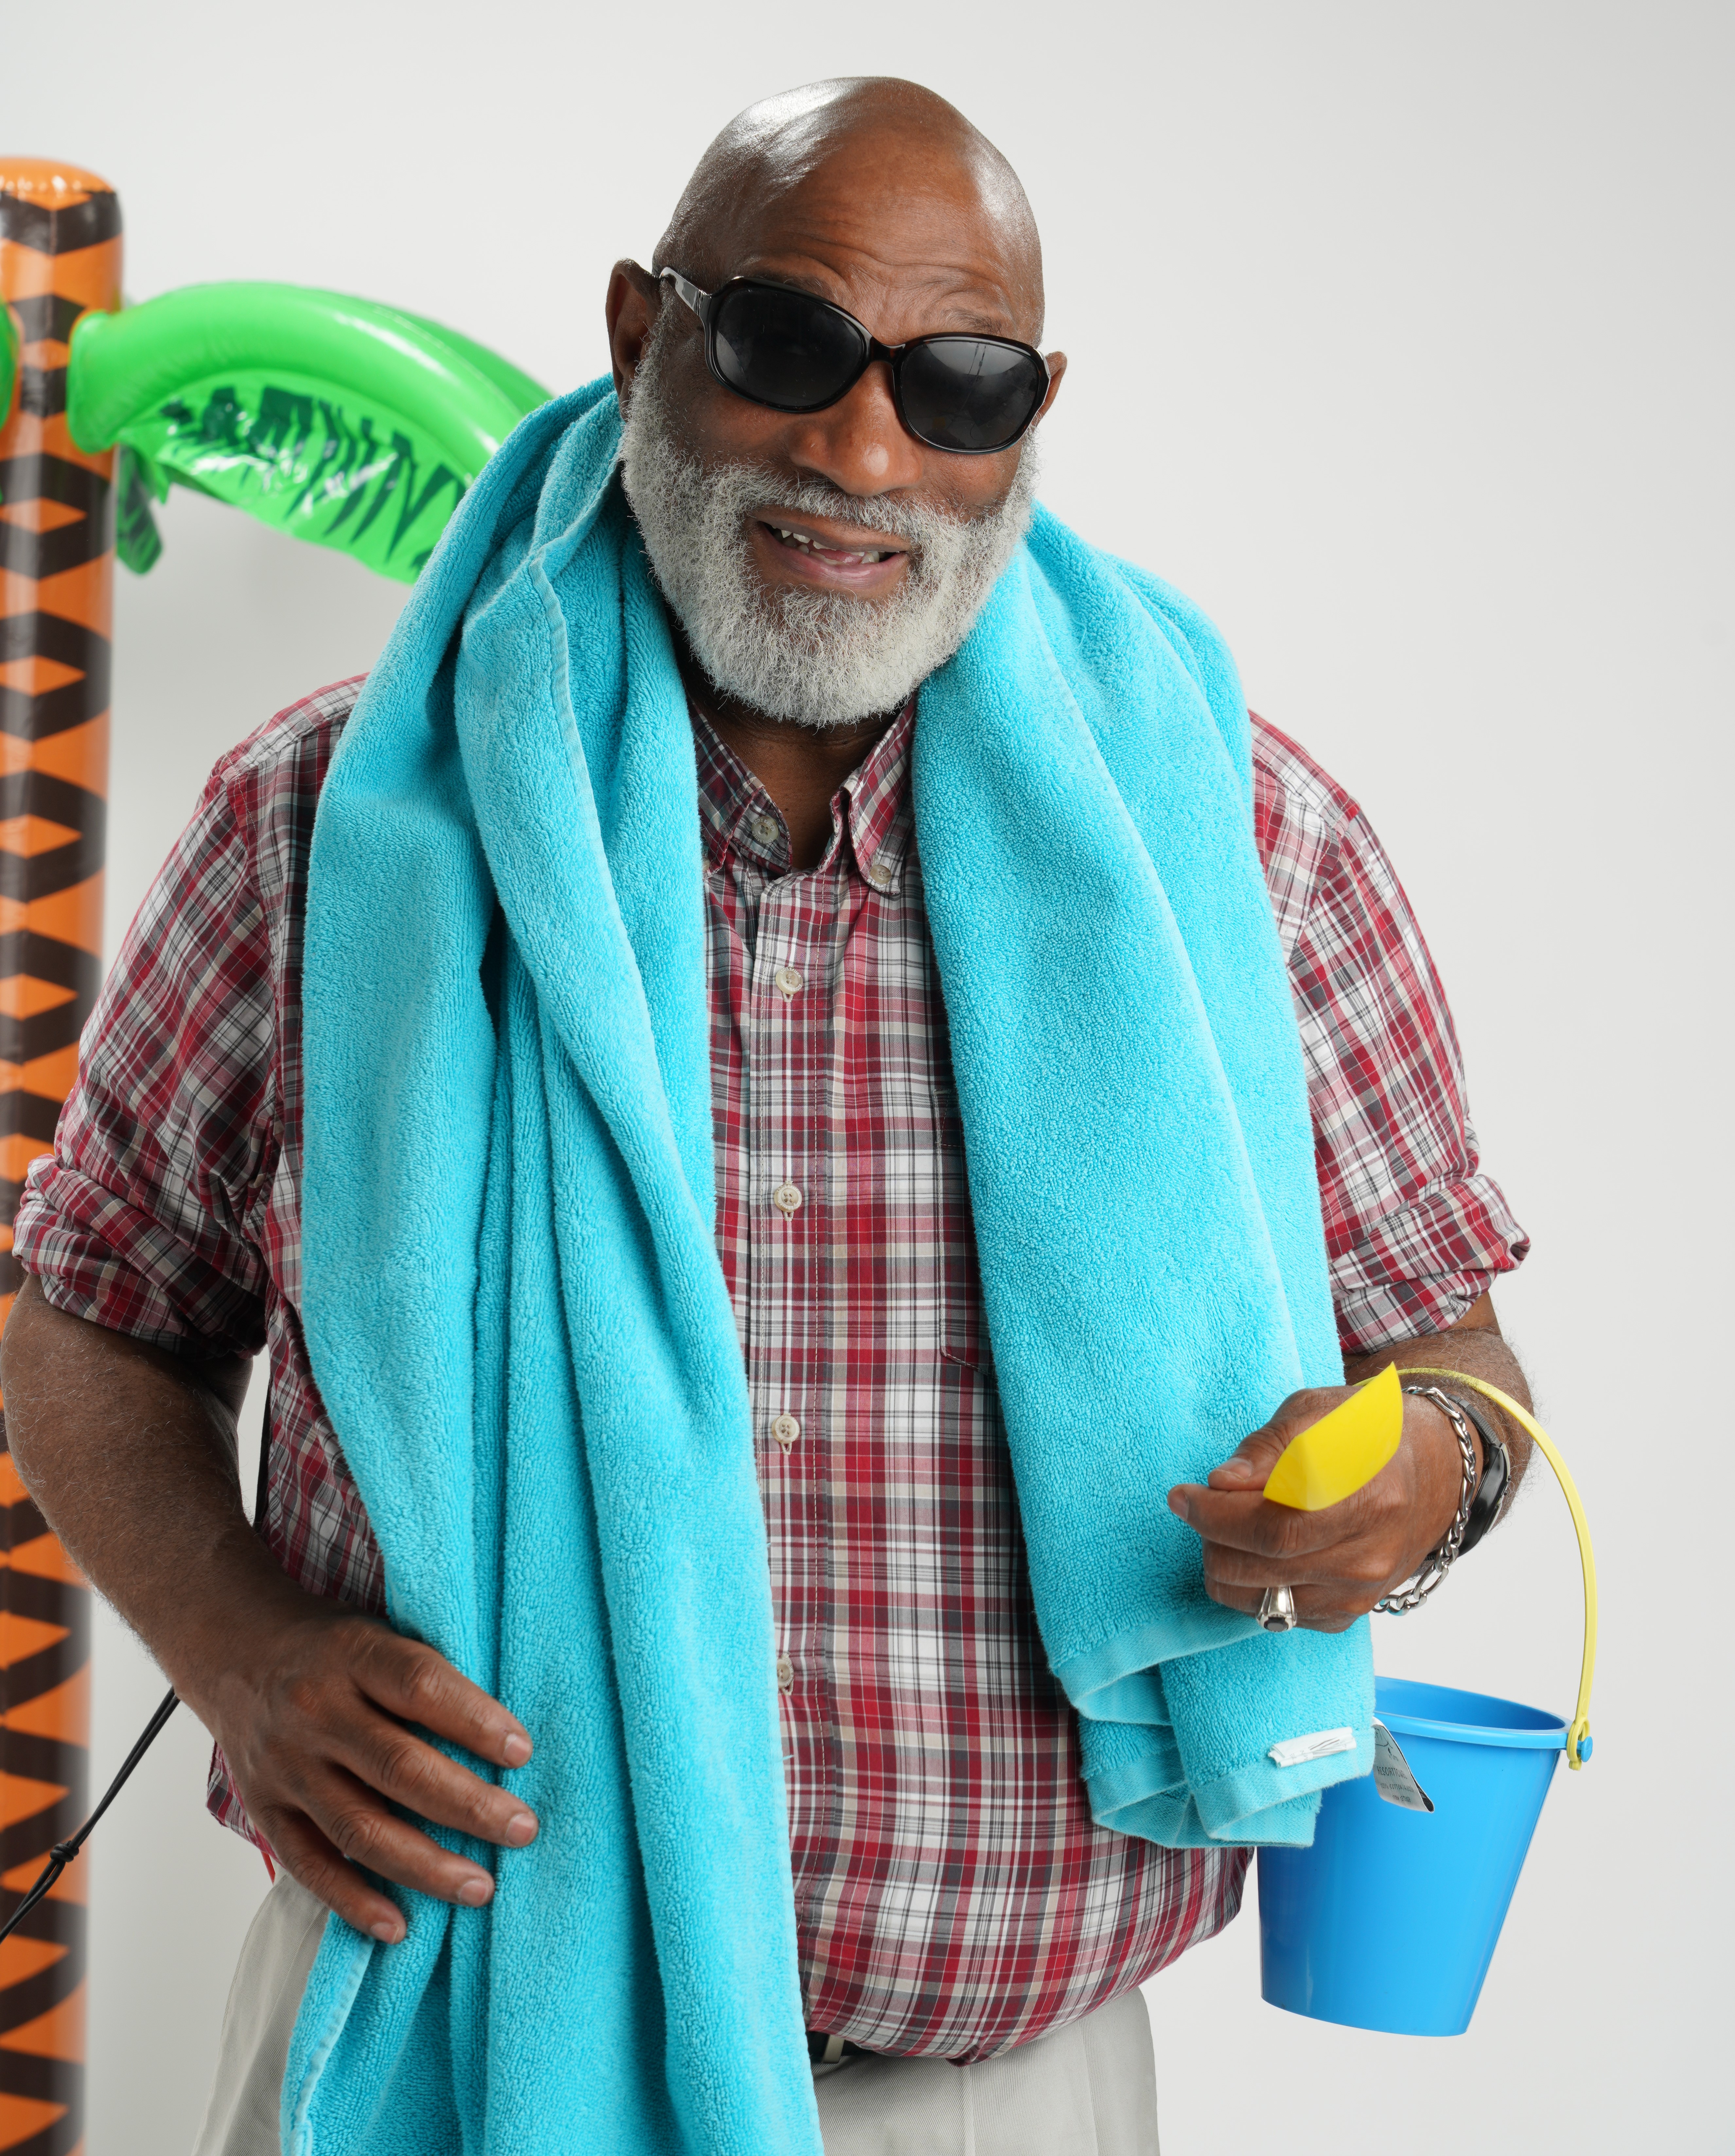 A Black older man wears sunglasses and a beach towel around his neck and carries a blue bucket. Inflatable palm tree in the background.